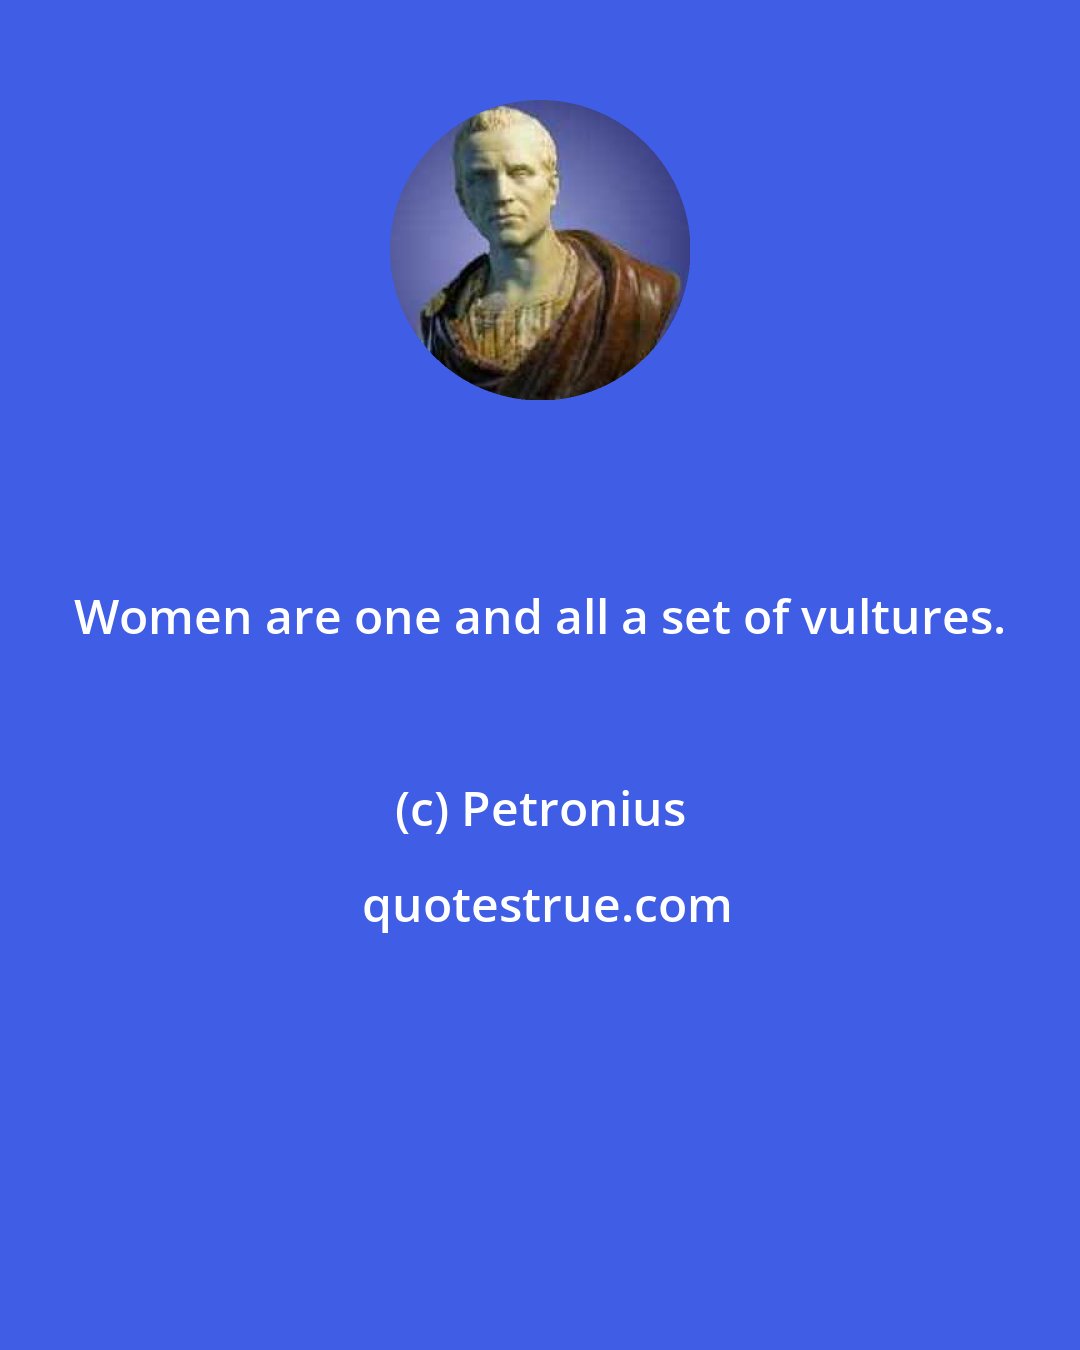 Petronius: Women are one and all a set of vultures.